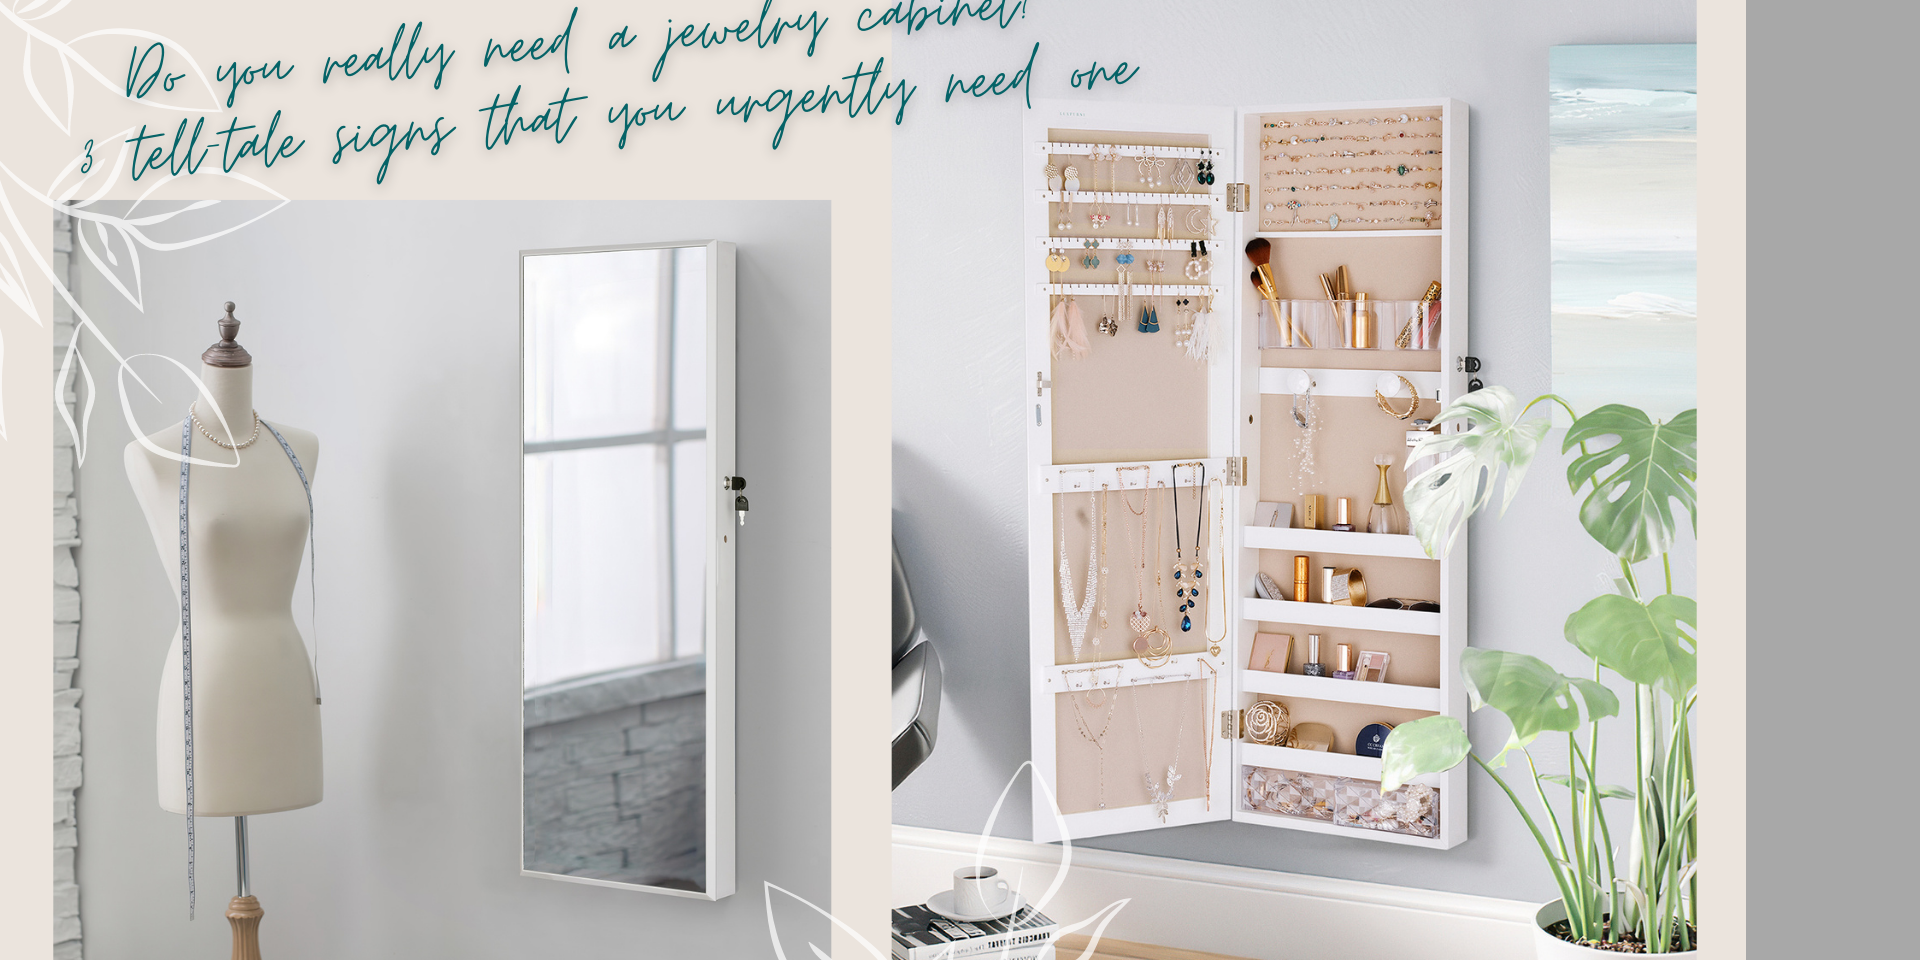 3 tell-tale signs that you urgently need a jewelry cabinet - Luxfurni